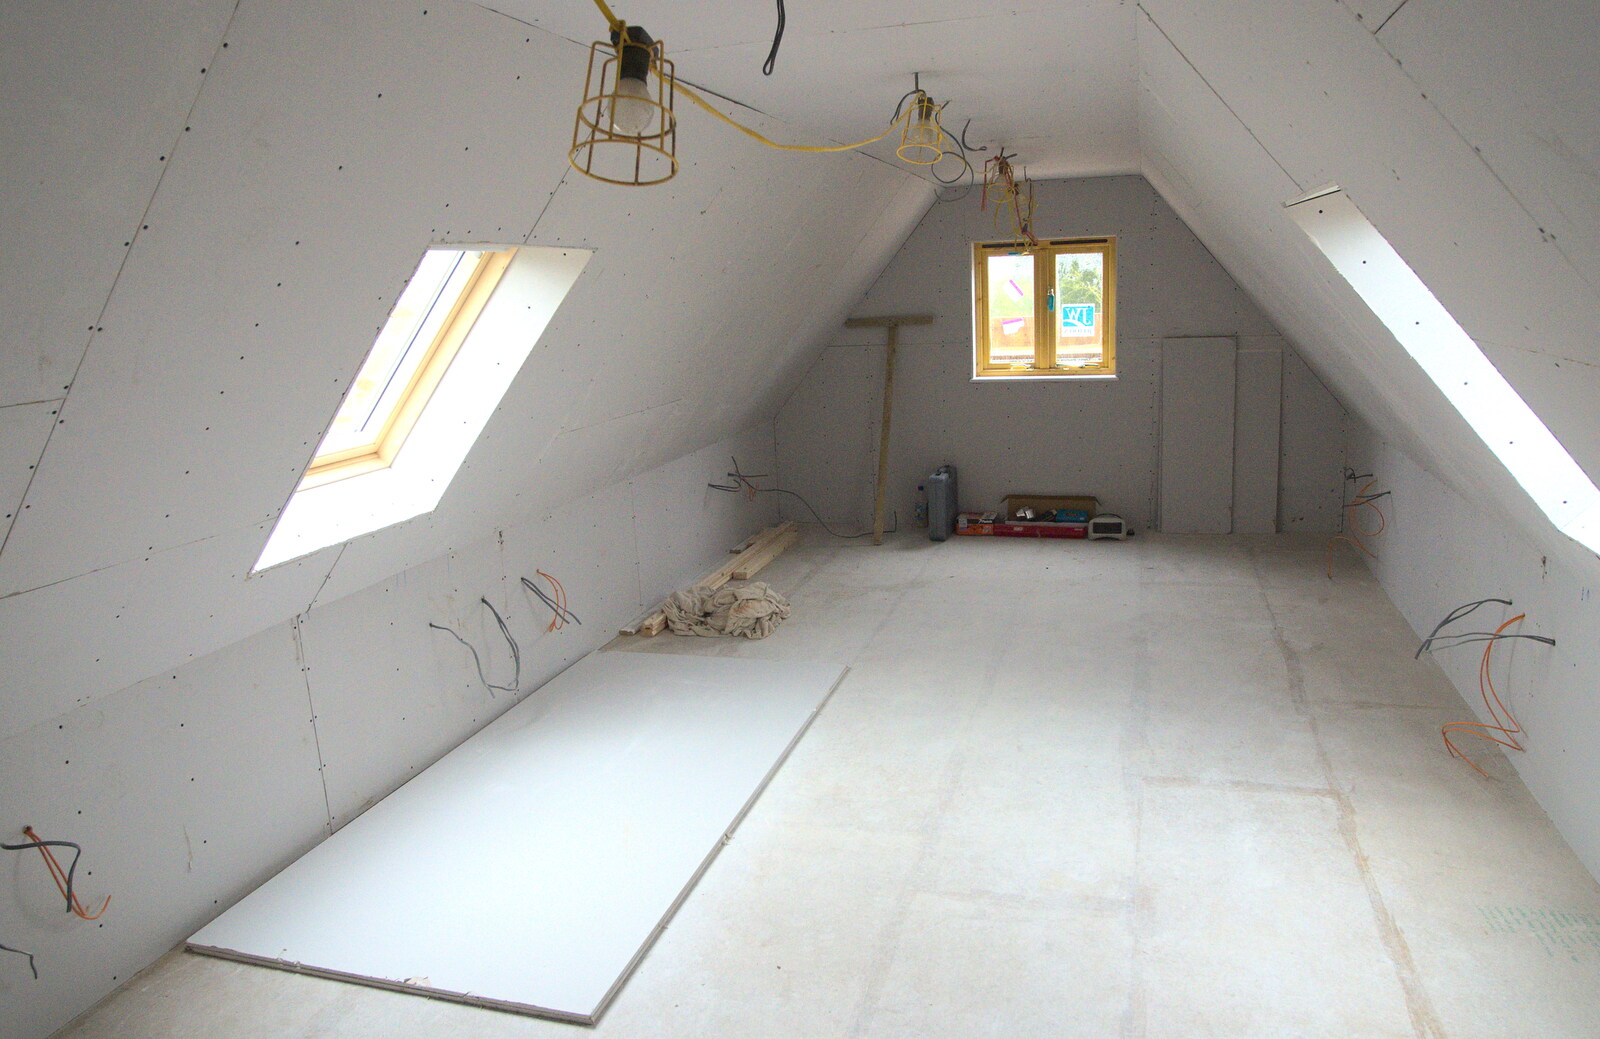 The plasterboarded office from A Night at the Bank, and a Building Update, Brome and Eye, Suffolk - 7th February 2014